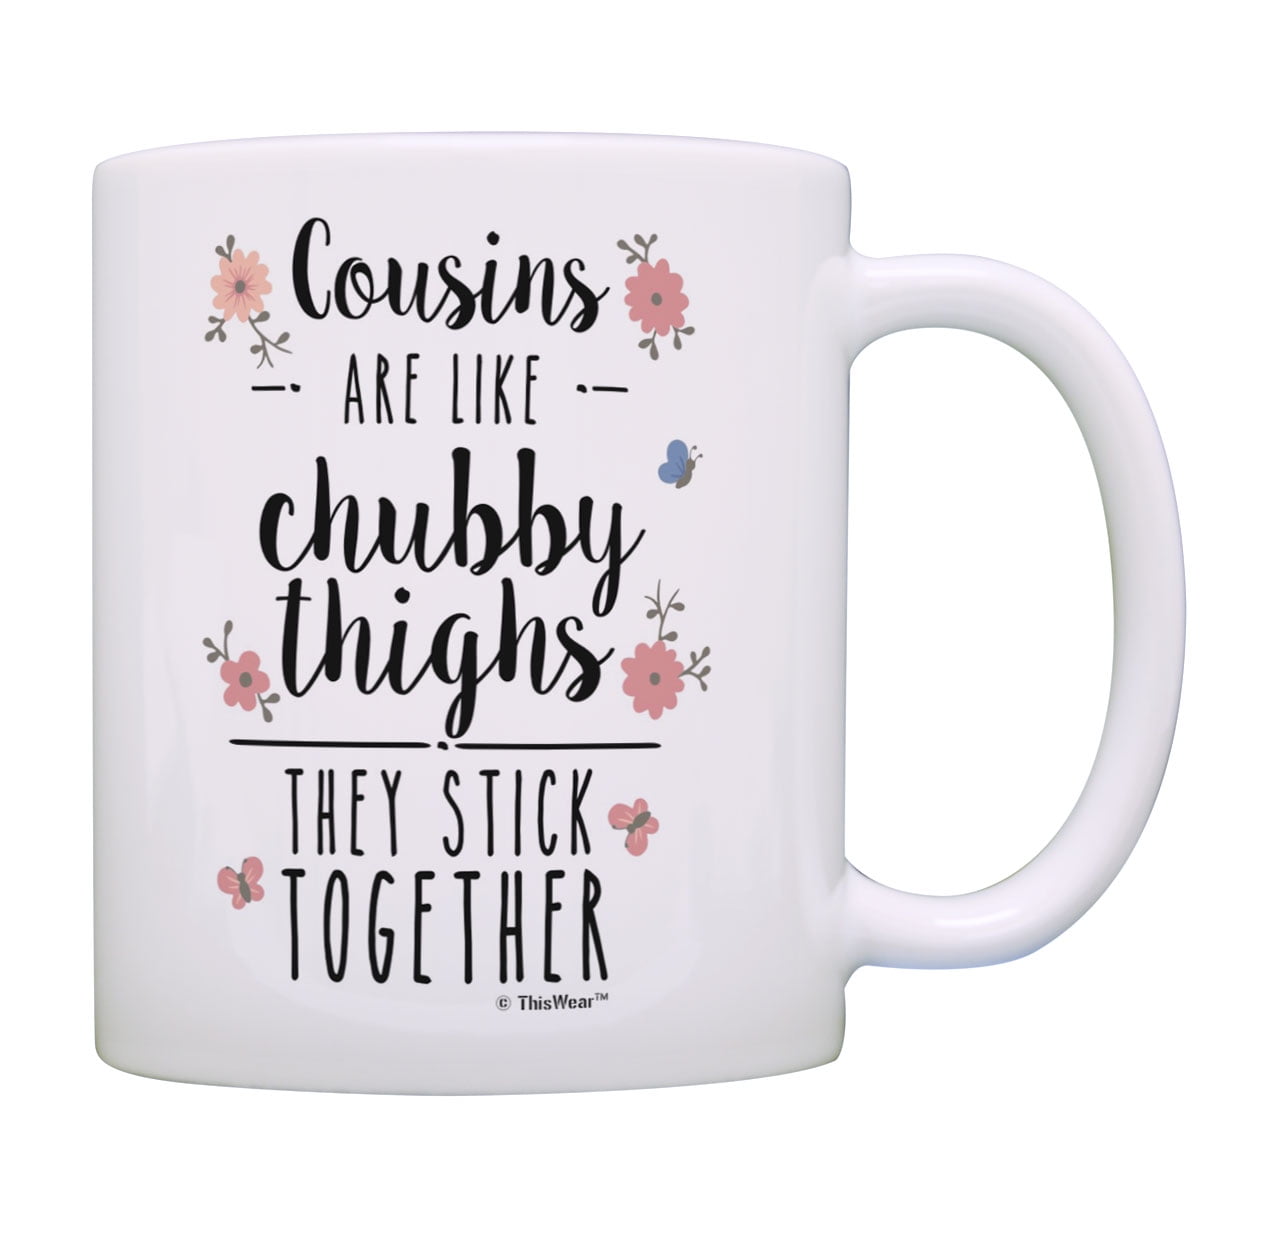 Cousin Gift Mug Cousin Nutritional Facts Gift Coffee Tea Cup